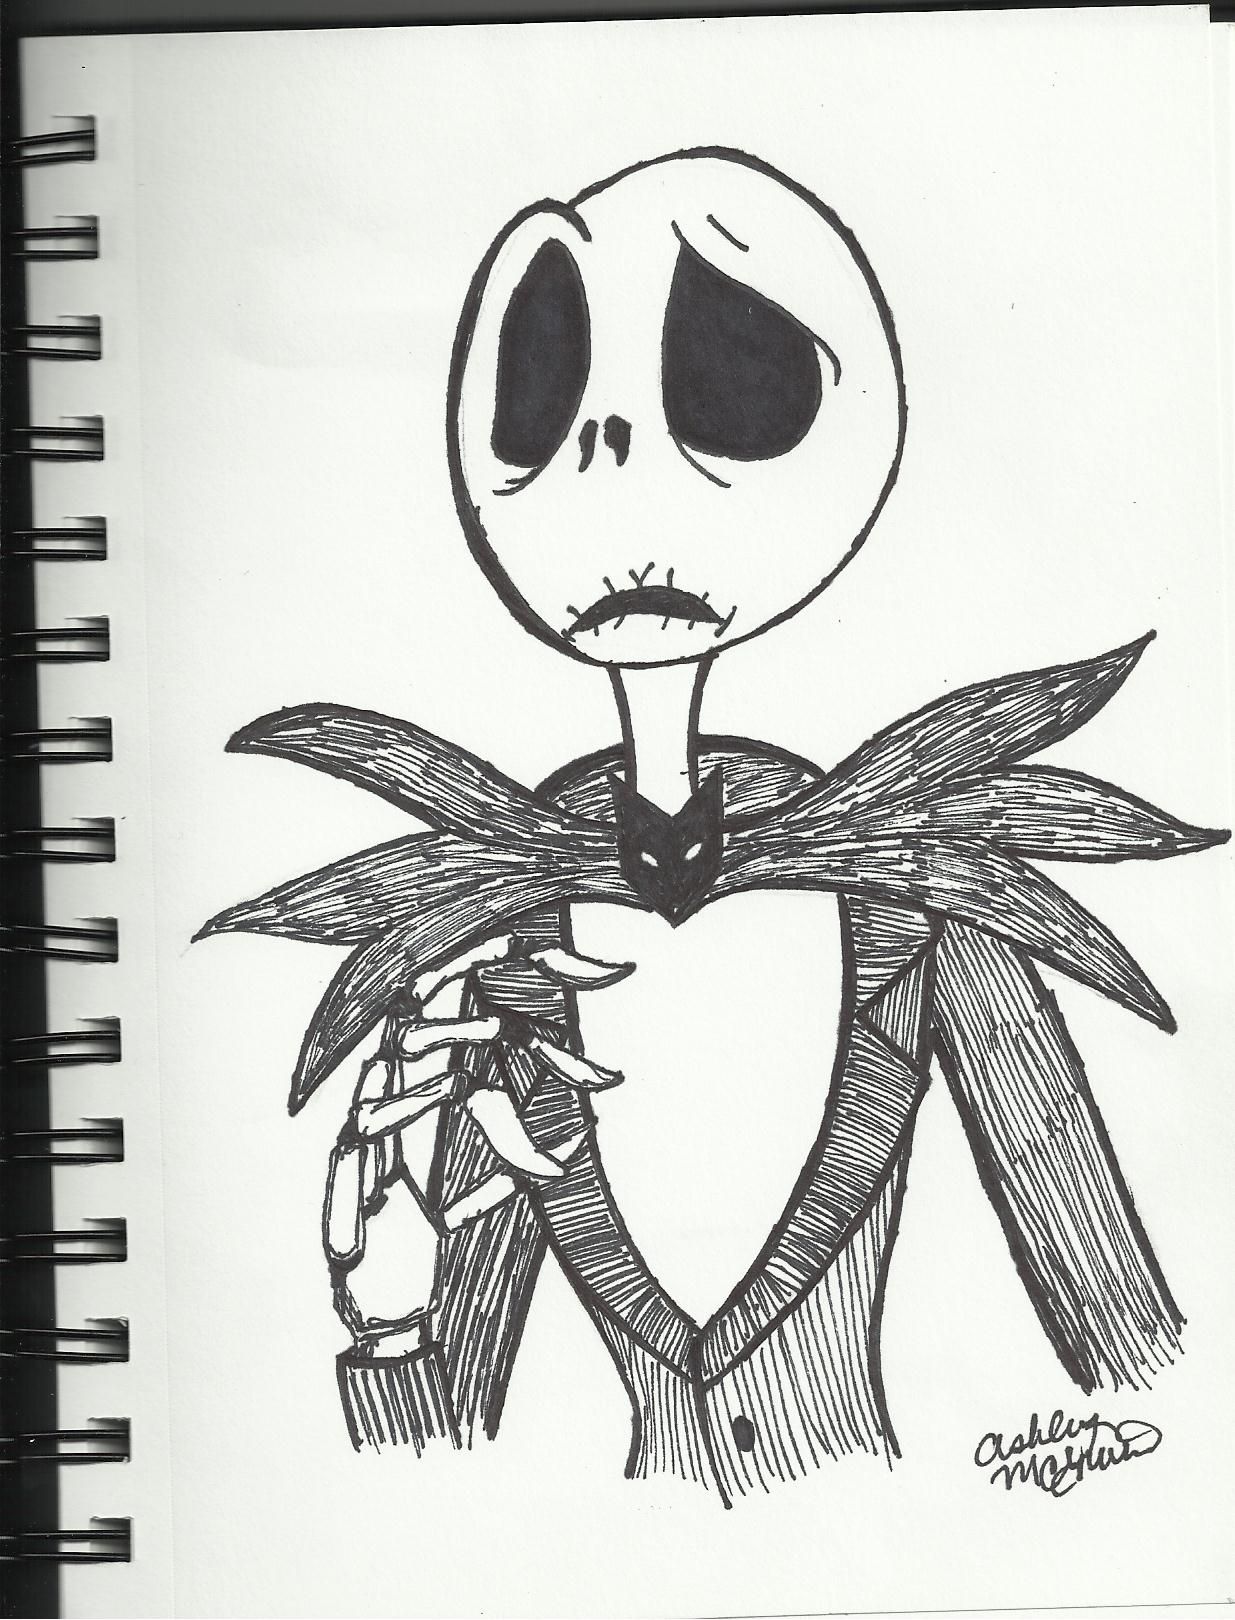 The Nightmare Before Christmas Drawings at Explore